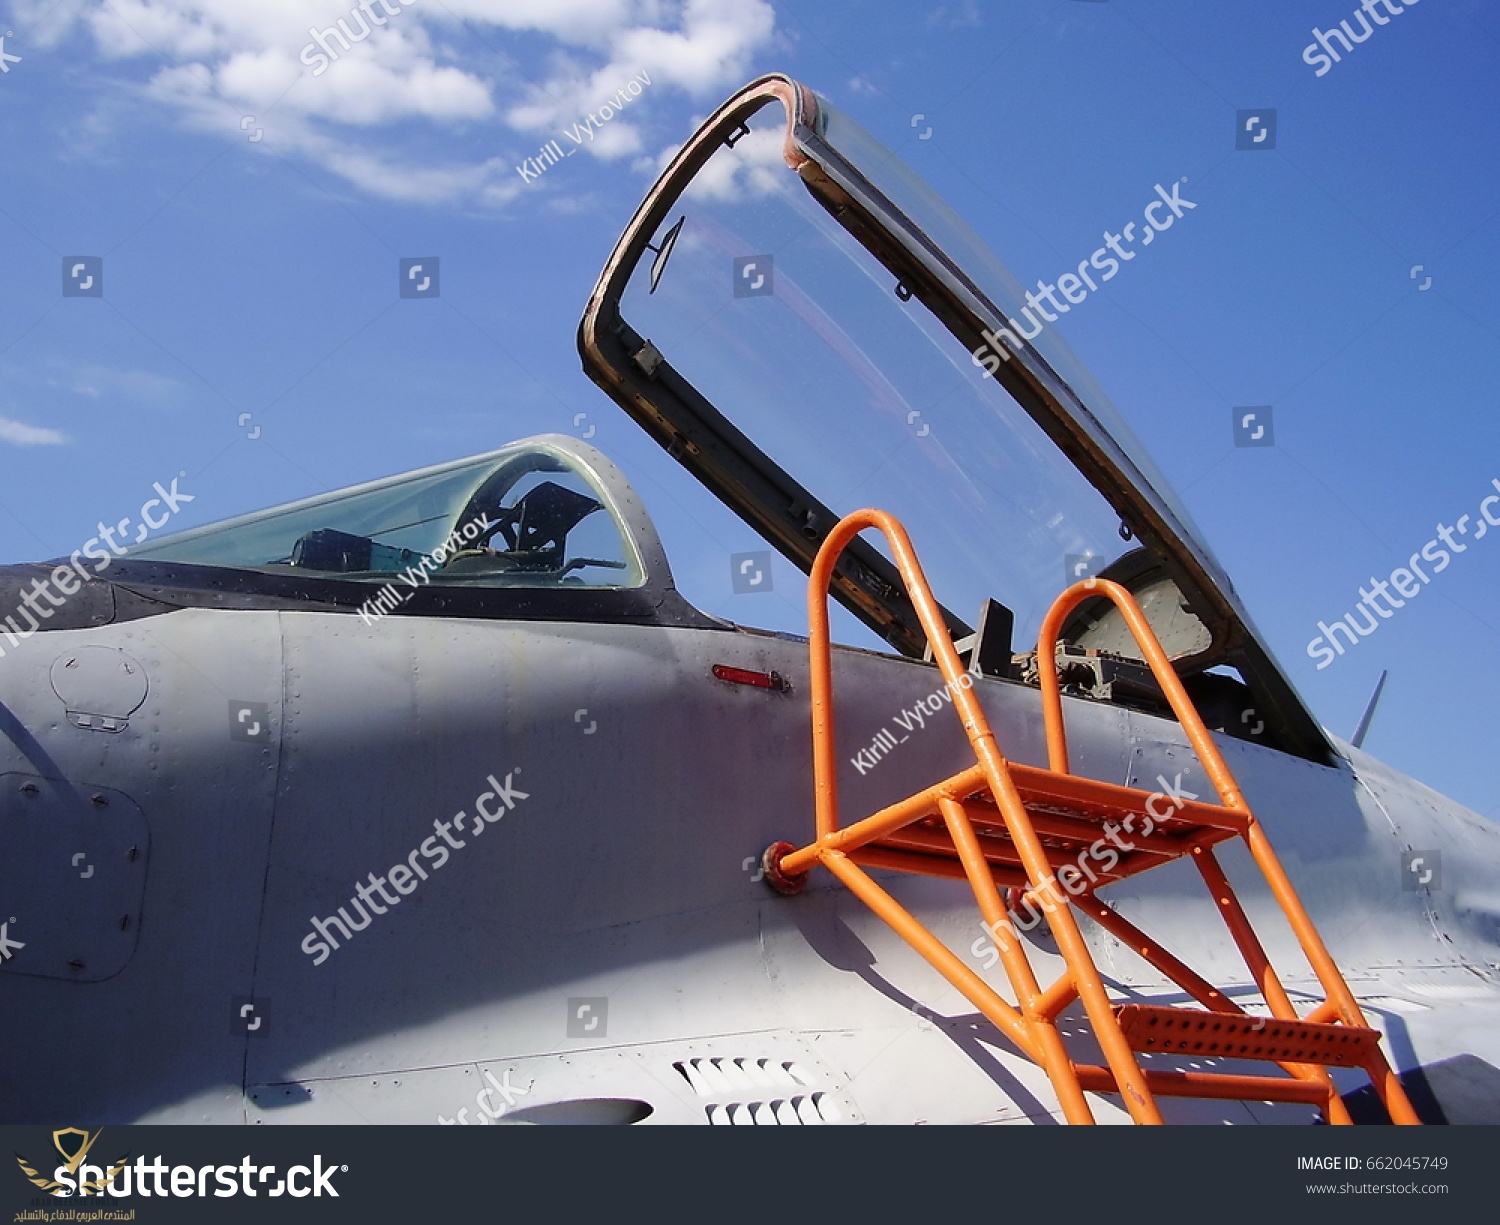 stock-photo-the-cockpit-of-a-military-aircraft-outside-with-a-ladder-closeup-662045749.jpg